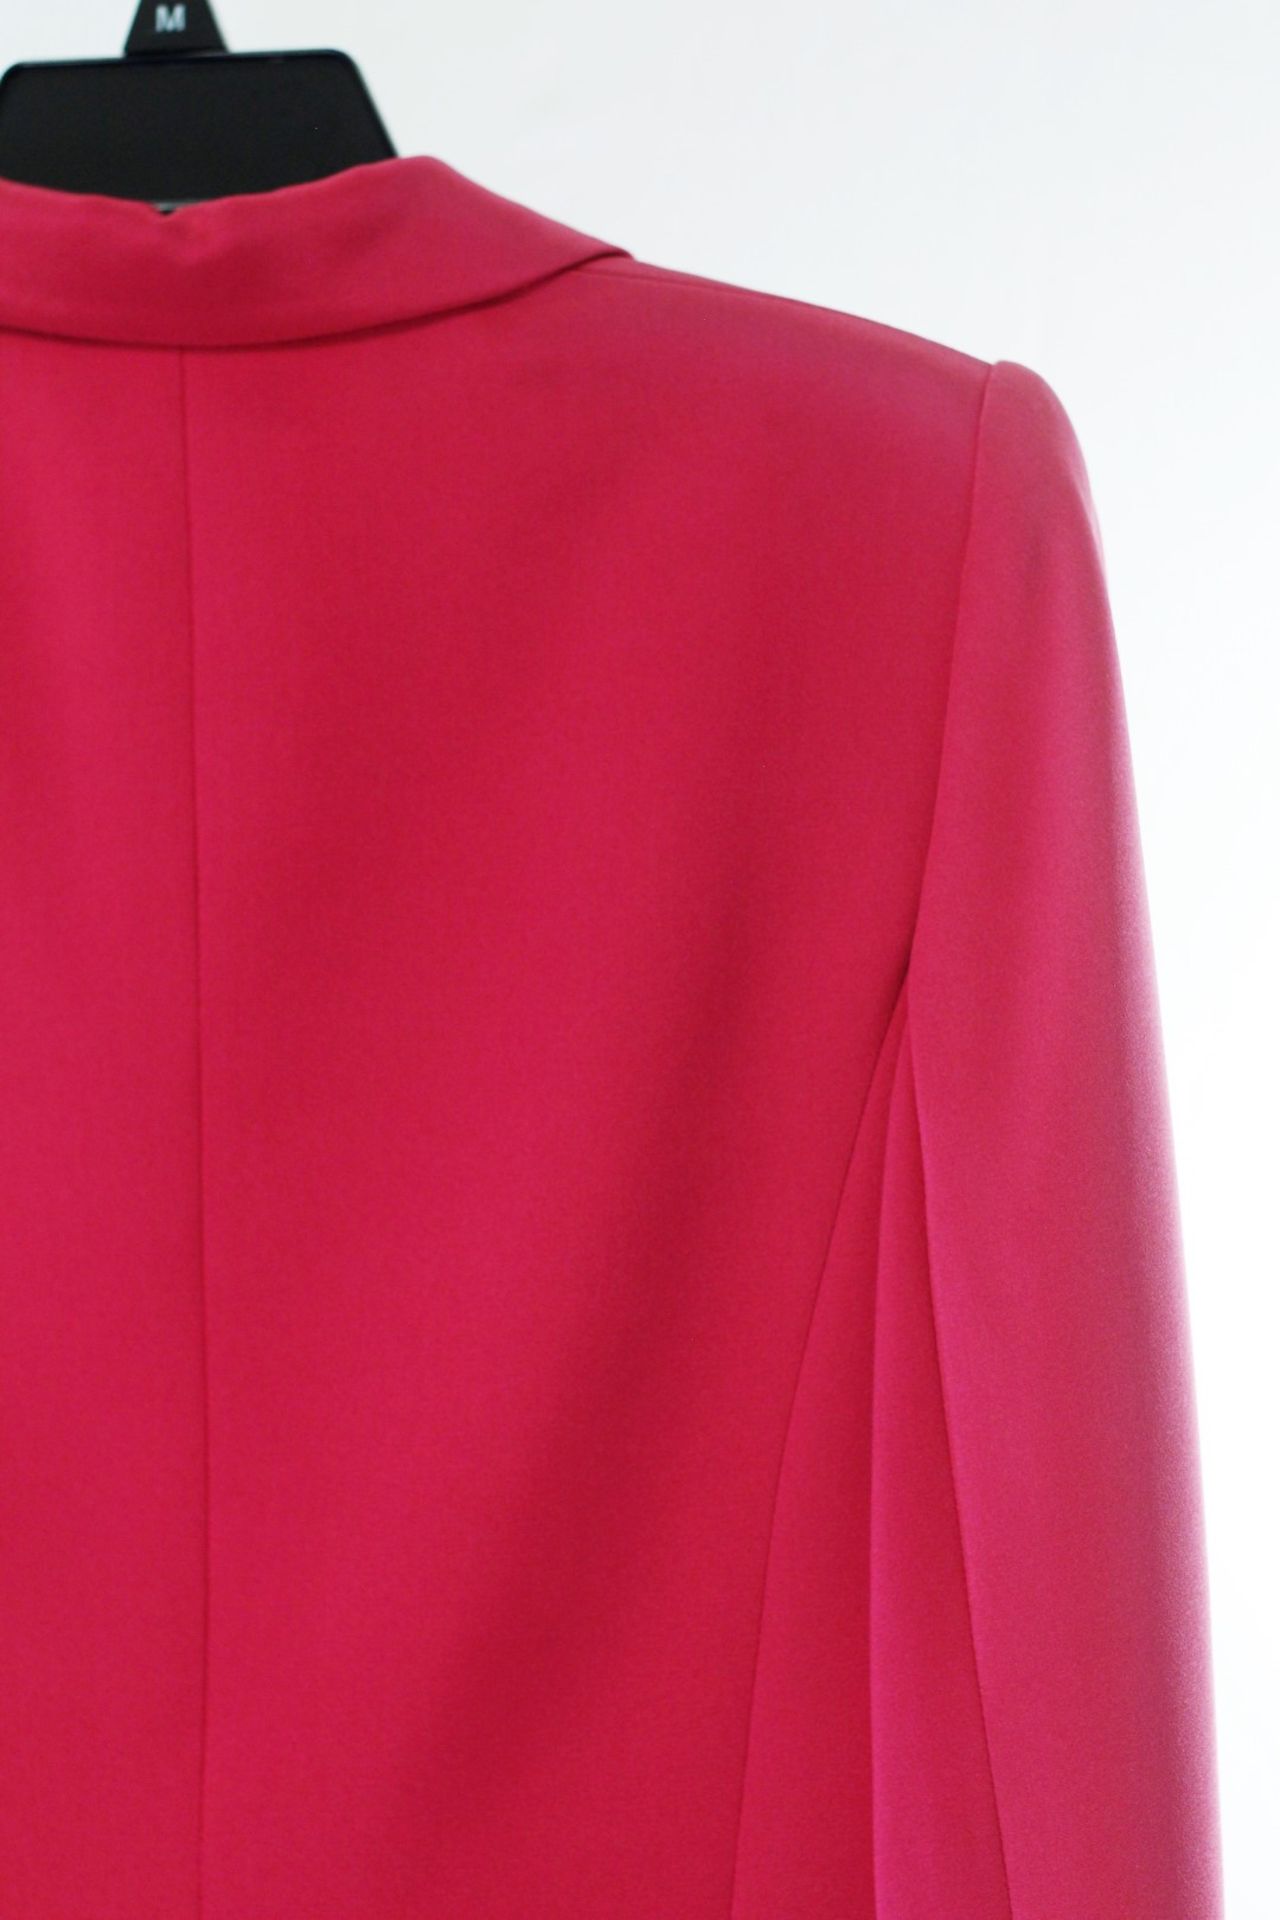 1 x Anne Belin Fuscia Jacket - Size: 18 - Material: 100% Silk - From a High End Clothing Boutique In - Image 6 of 9